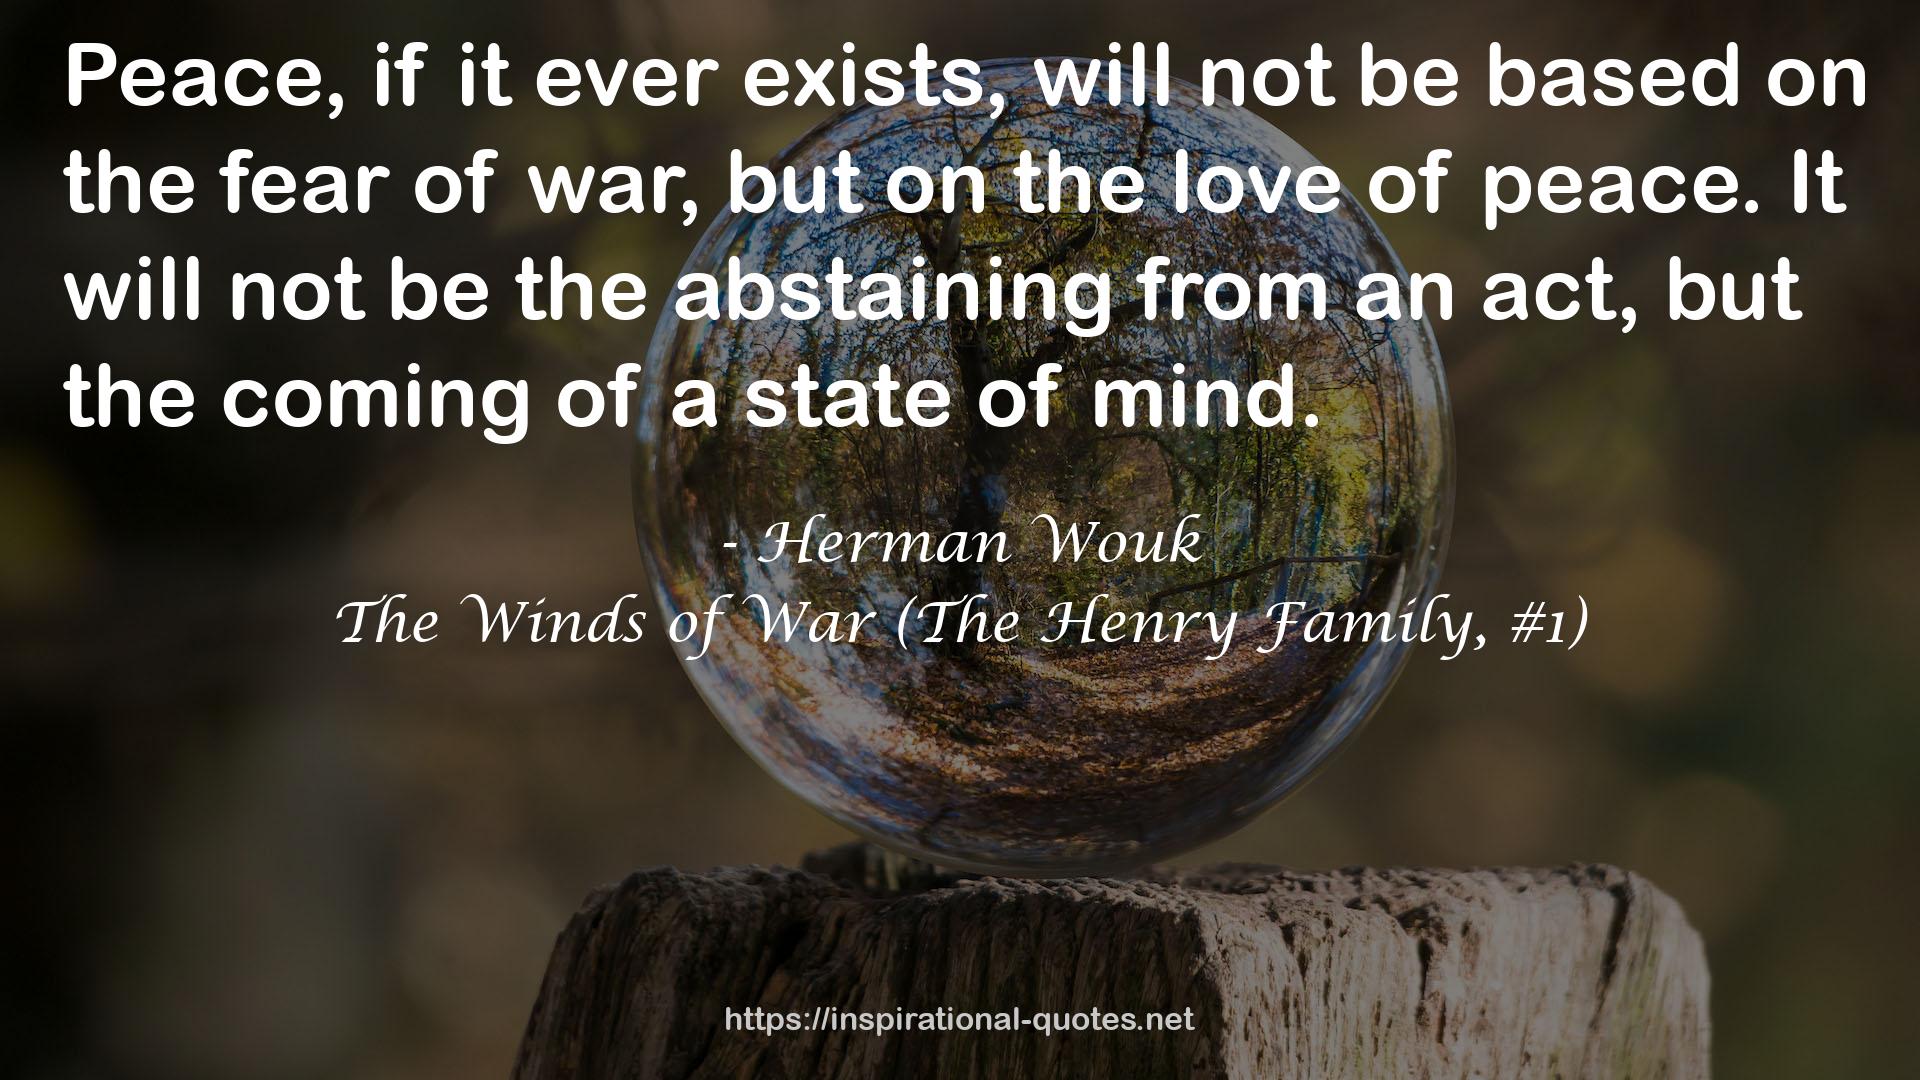 The Winds of War (The Henry Family, #1) QUOTES